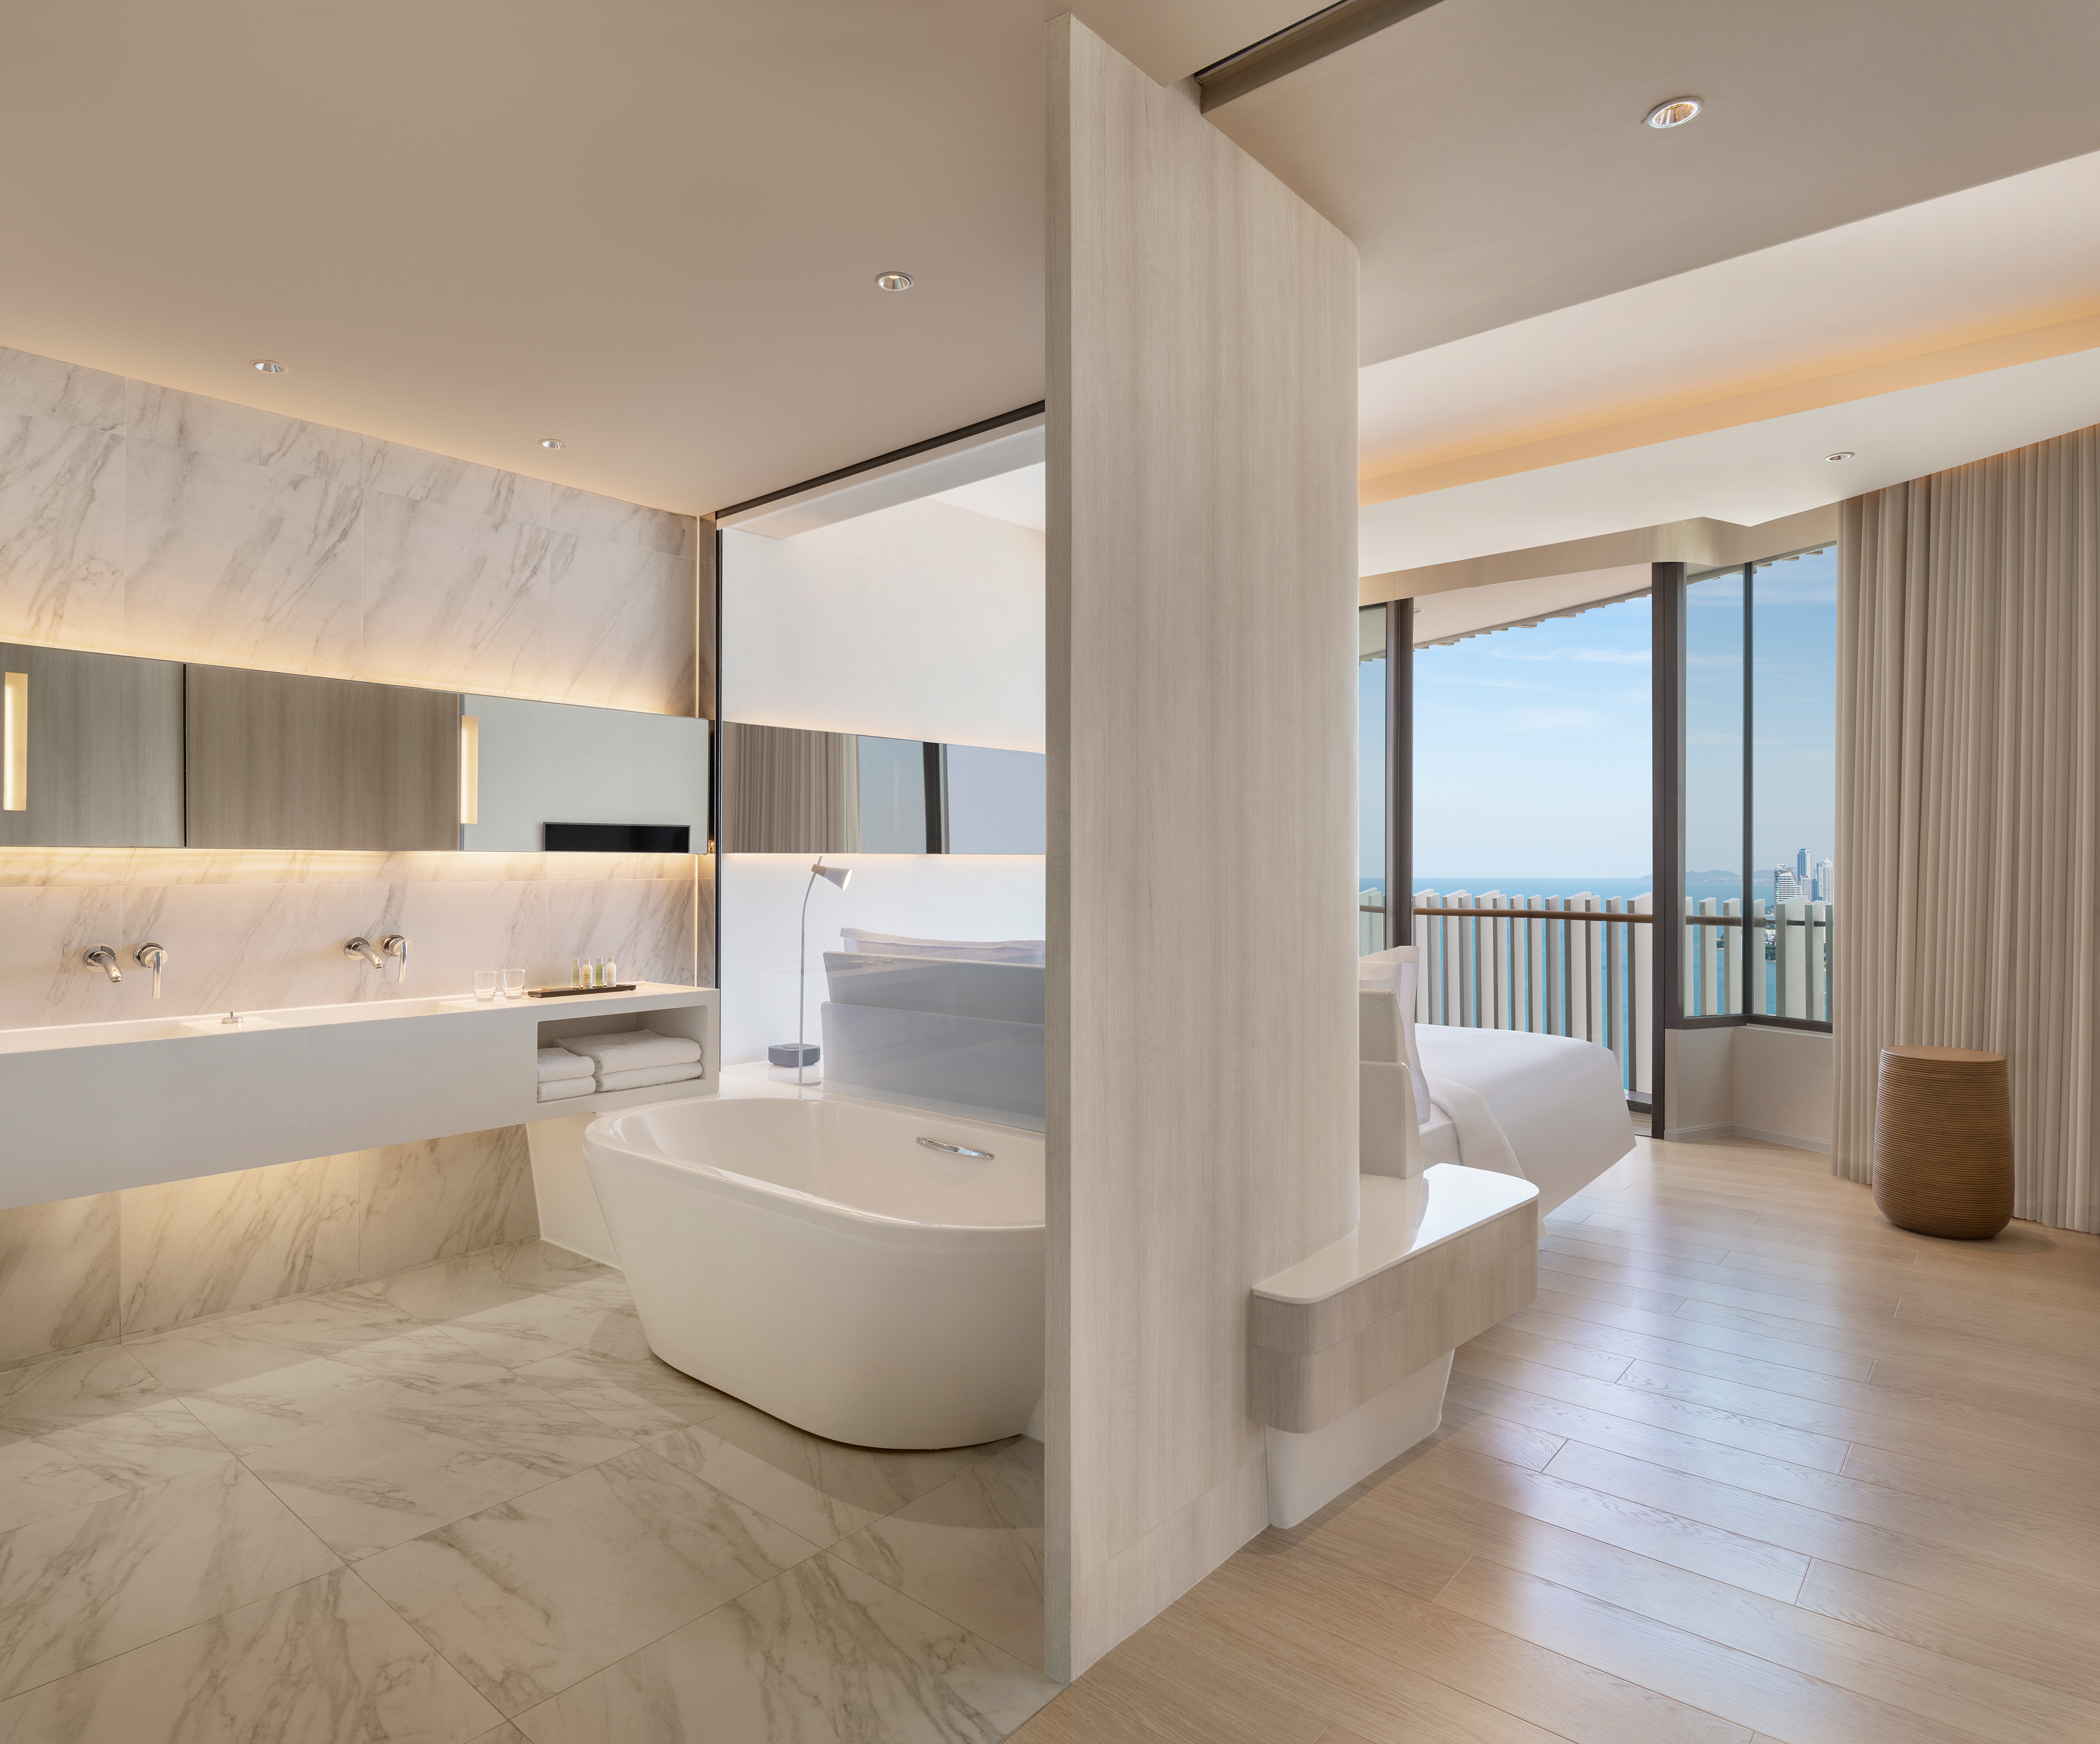 Bathtub and Vanity Area in Family Suite with Ocean View